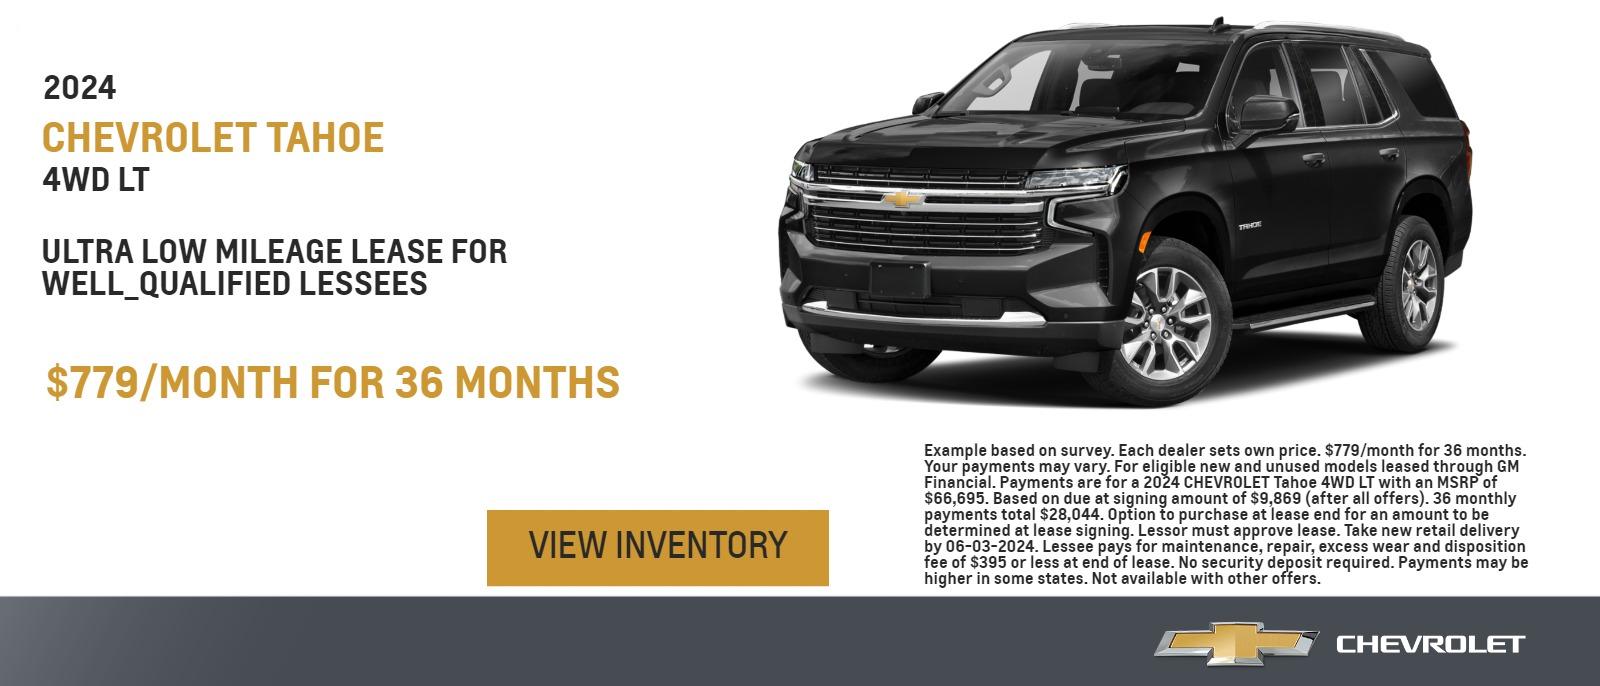 Chevrolet National Lease Offer
Ultra Low-Mileage Lease for Well-Qualified Lessees.
$779/month for 36 months.